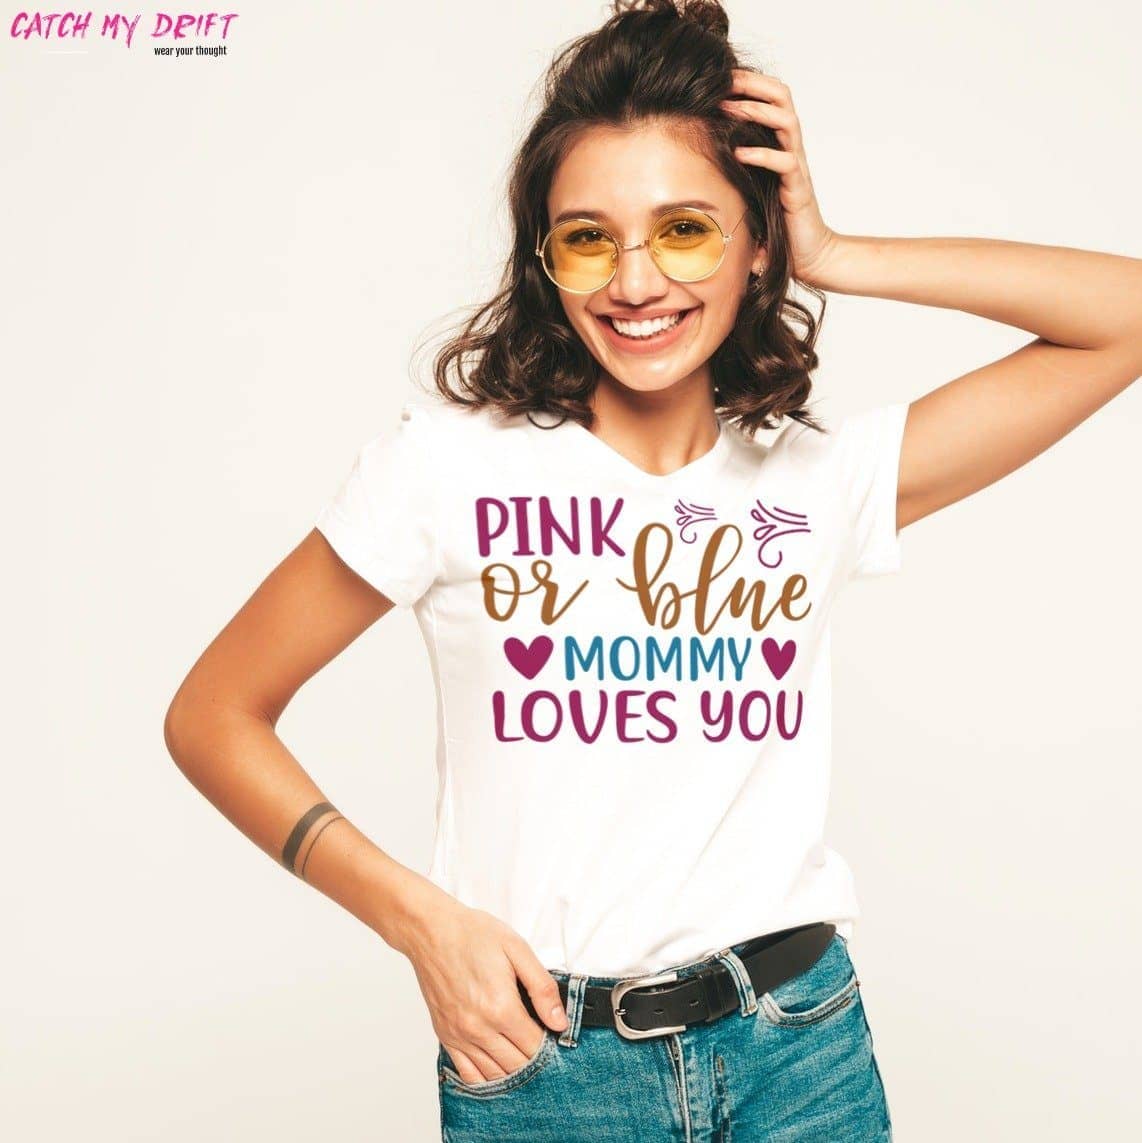 Pink or Blue Mommy Loves You Special T Shirt for Women - Catch My Drift India  clothing, expecting mom, female, made in india, mom, parents, pregnancy, pregnant, shirt, t shirt, tshirt